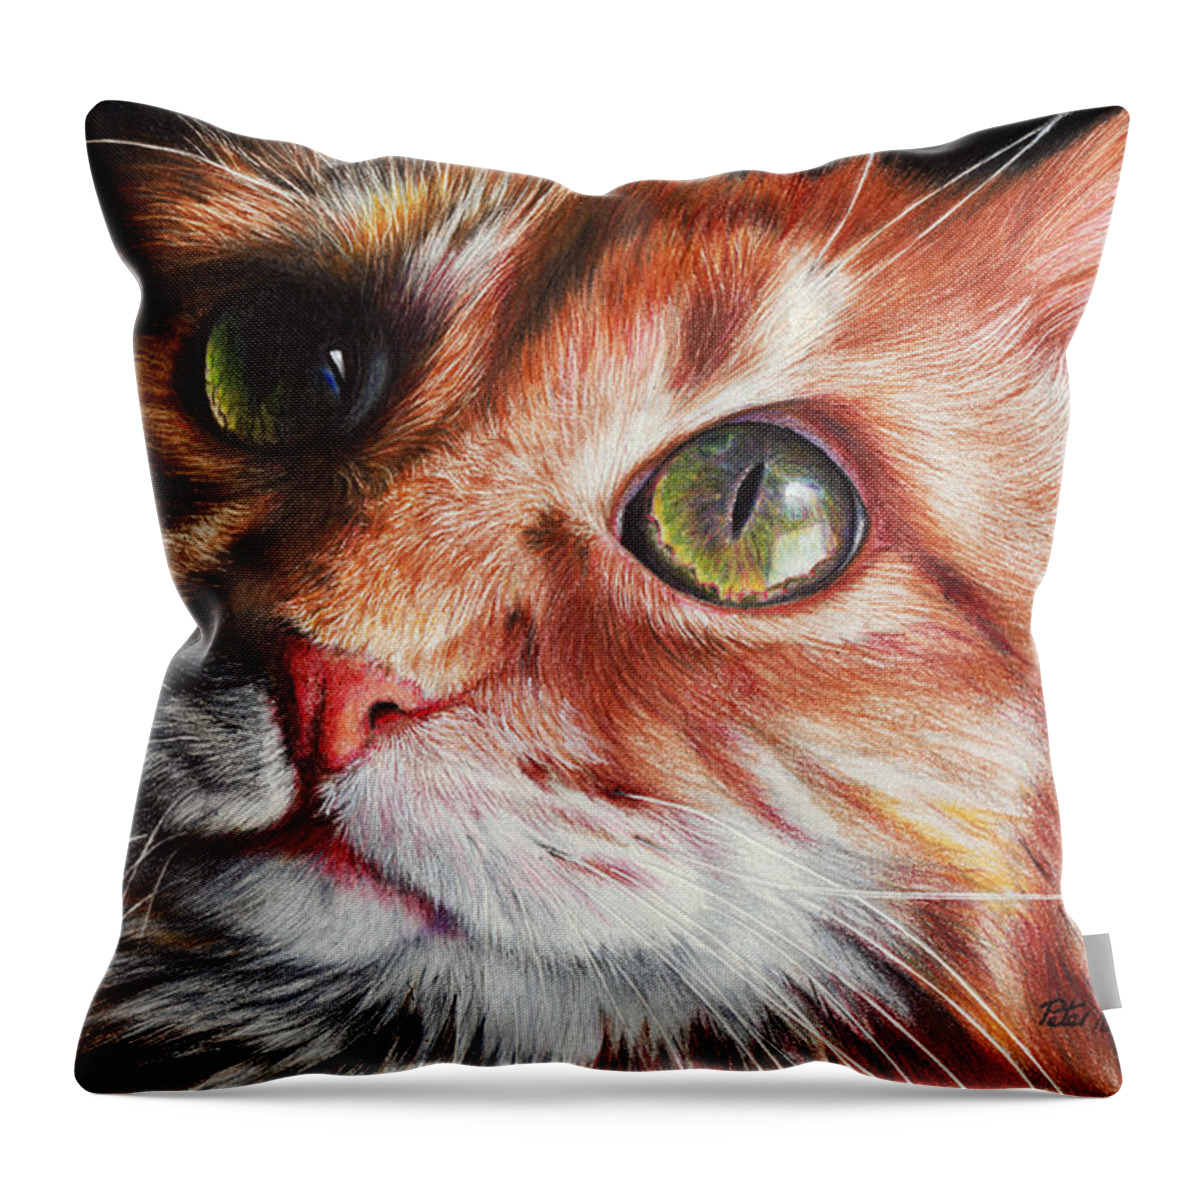 Cat Throw Pillow featuring the drawing Butter Wouldn't Melt by Peter Williams